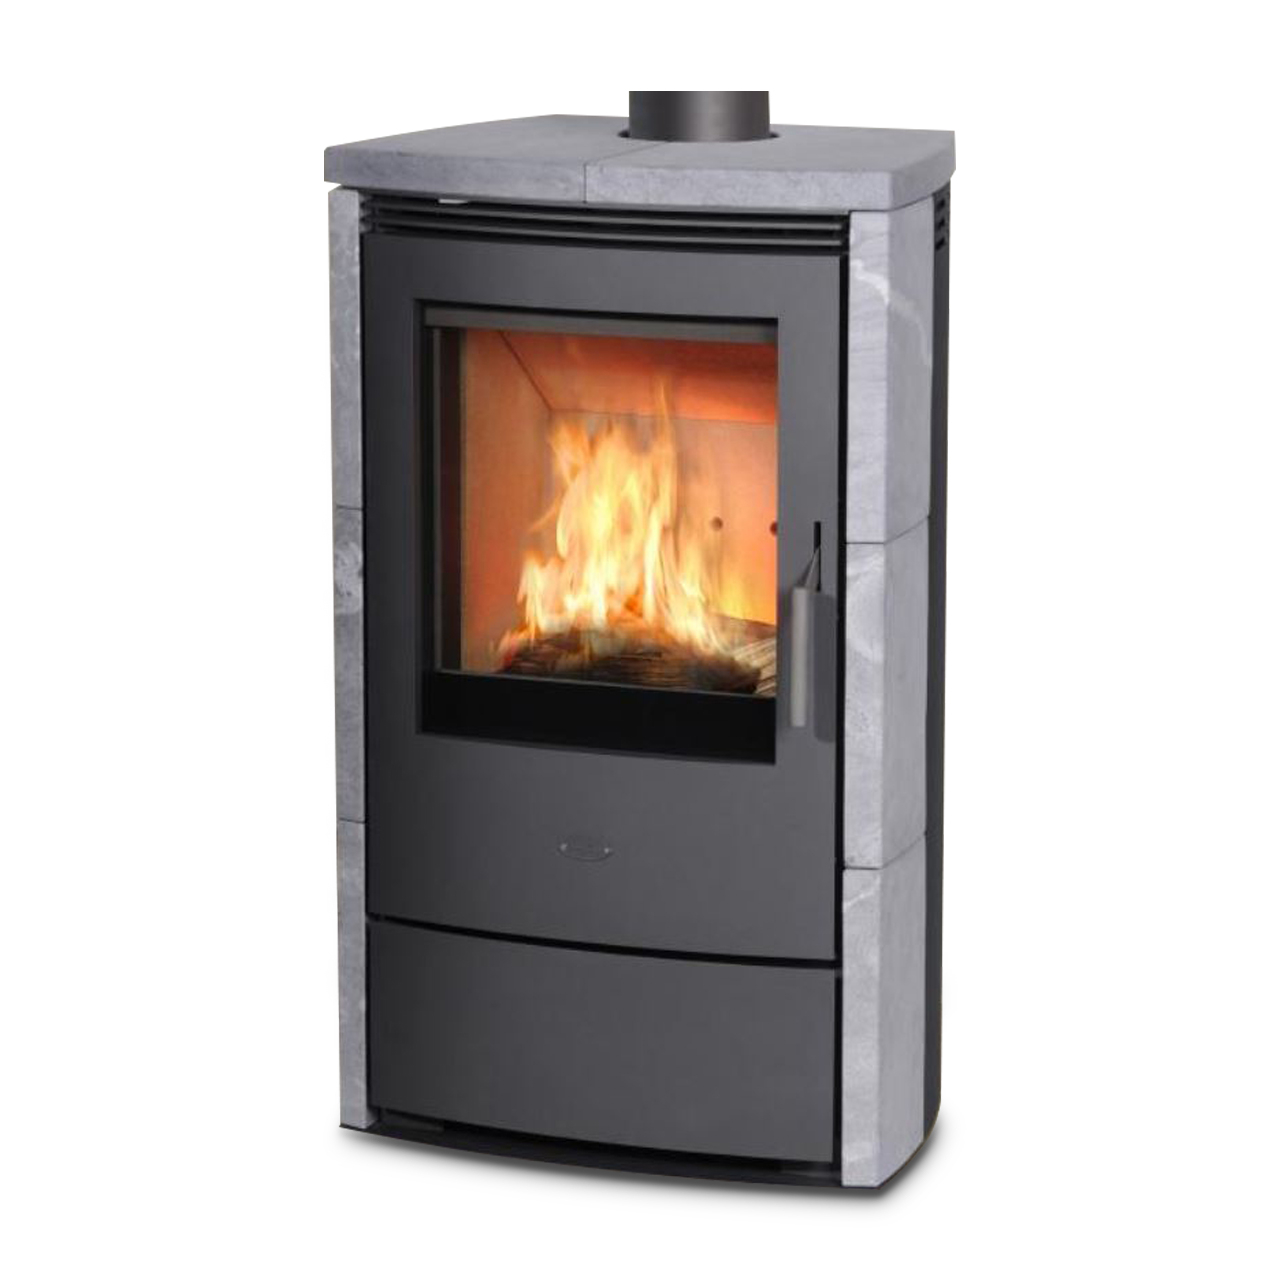 Fireplace Hearth Materials Awesome Kaminofen Fireplace Meltemi Speckstein 8 Kw